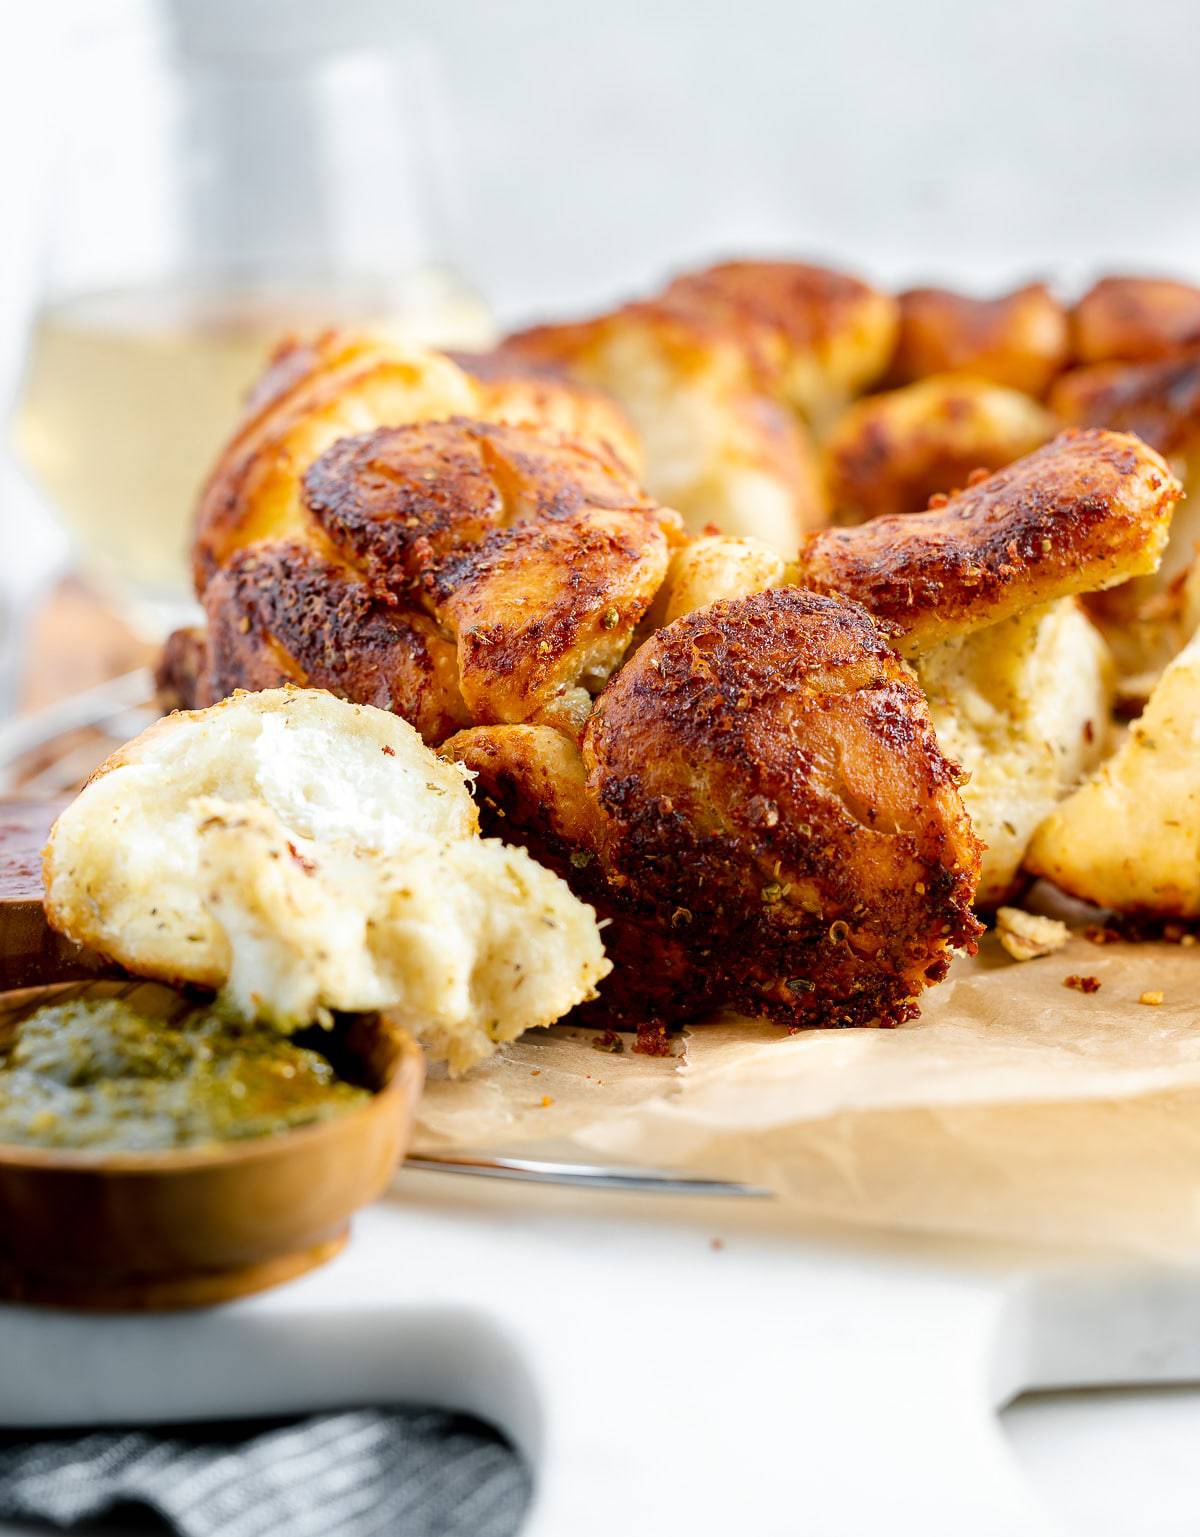 Pizza dough monkey bread served on parchment paper with pesto. 